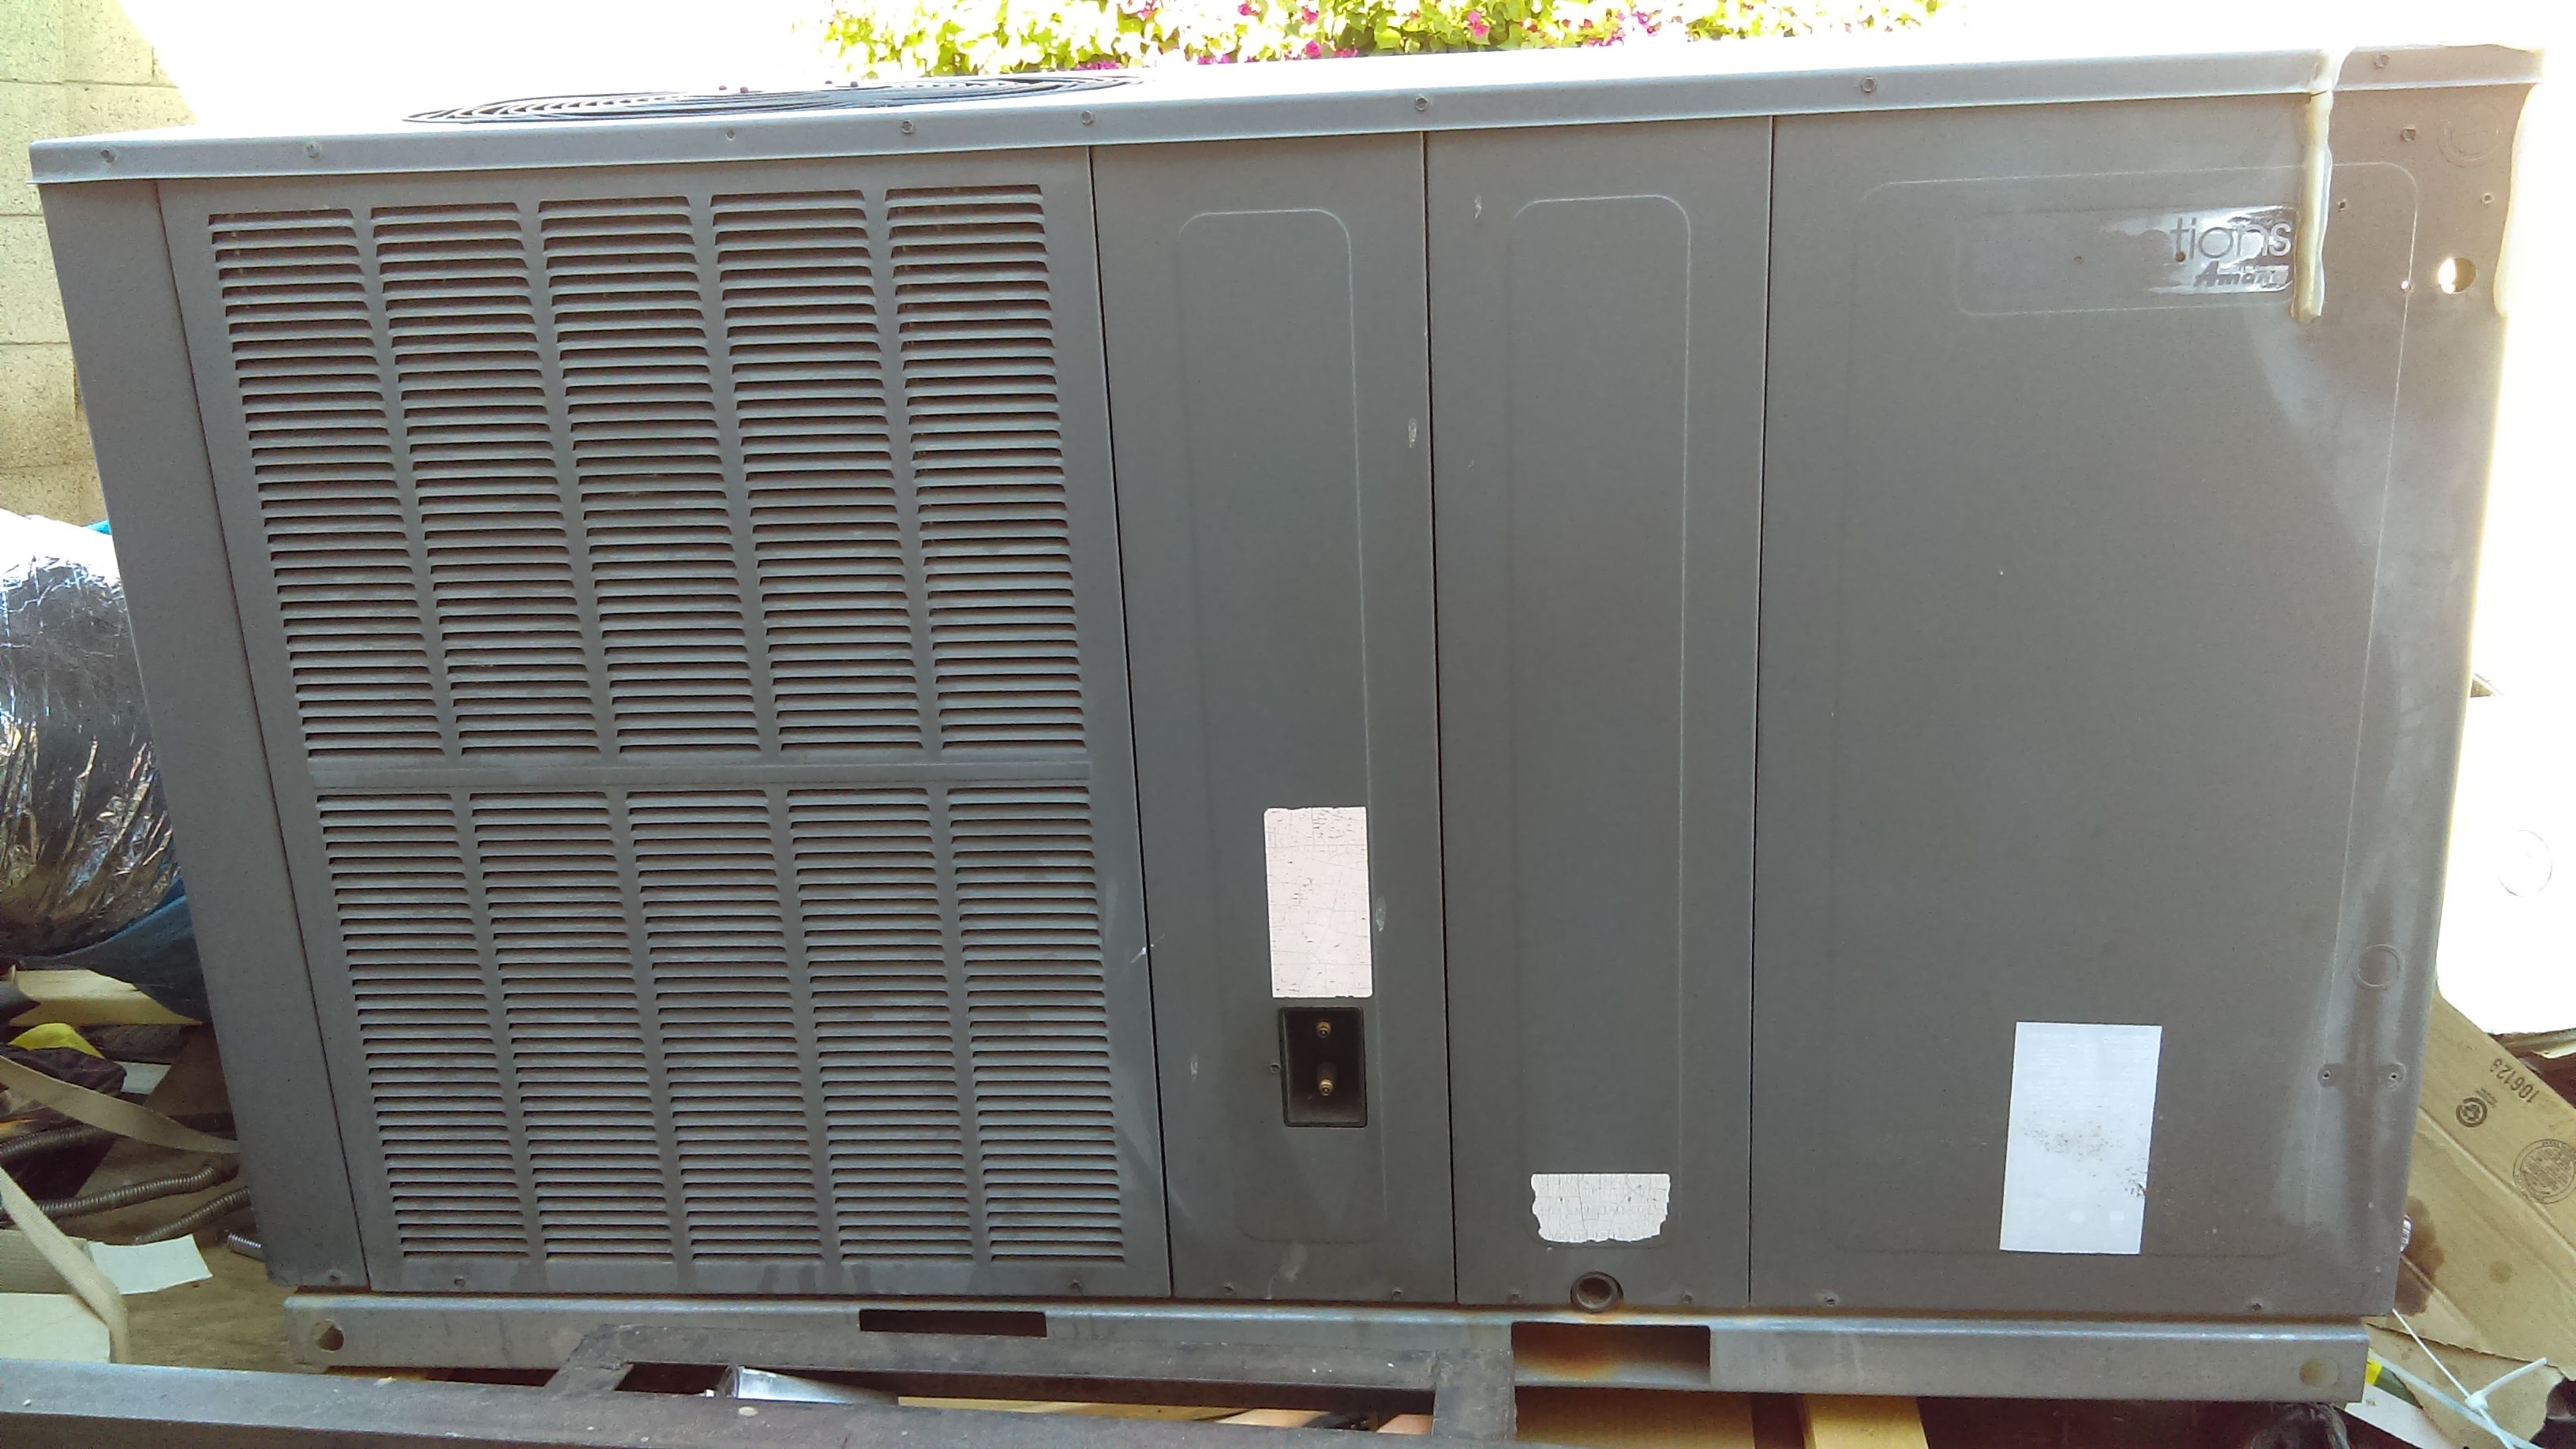 Air conditioning unit 5 ton heat pump used